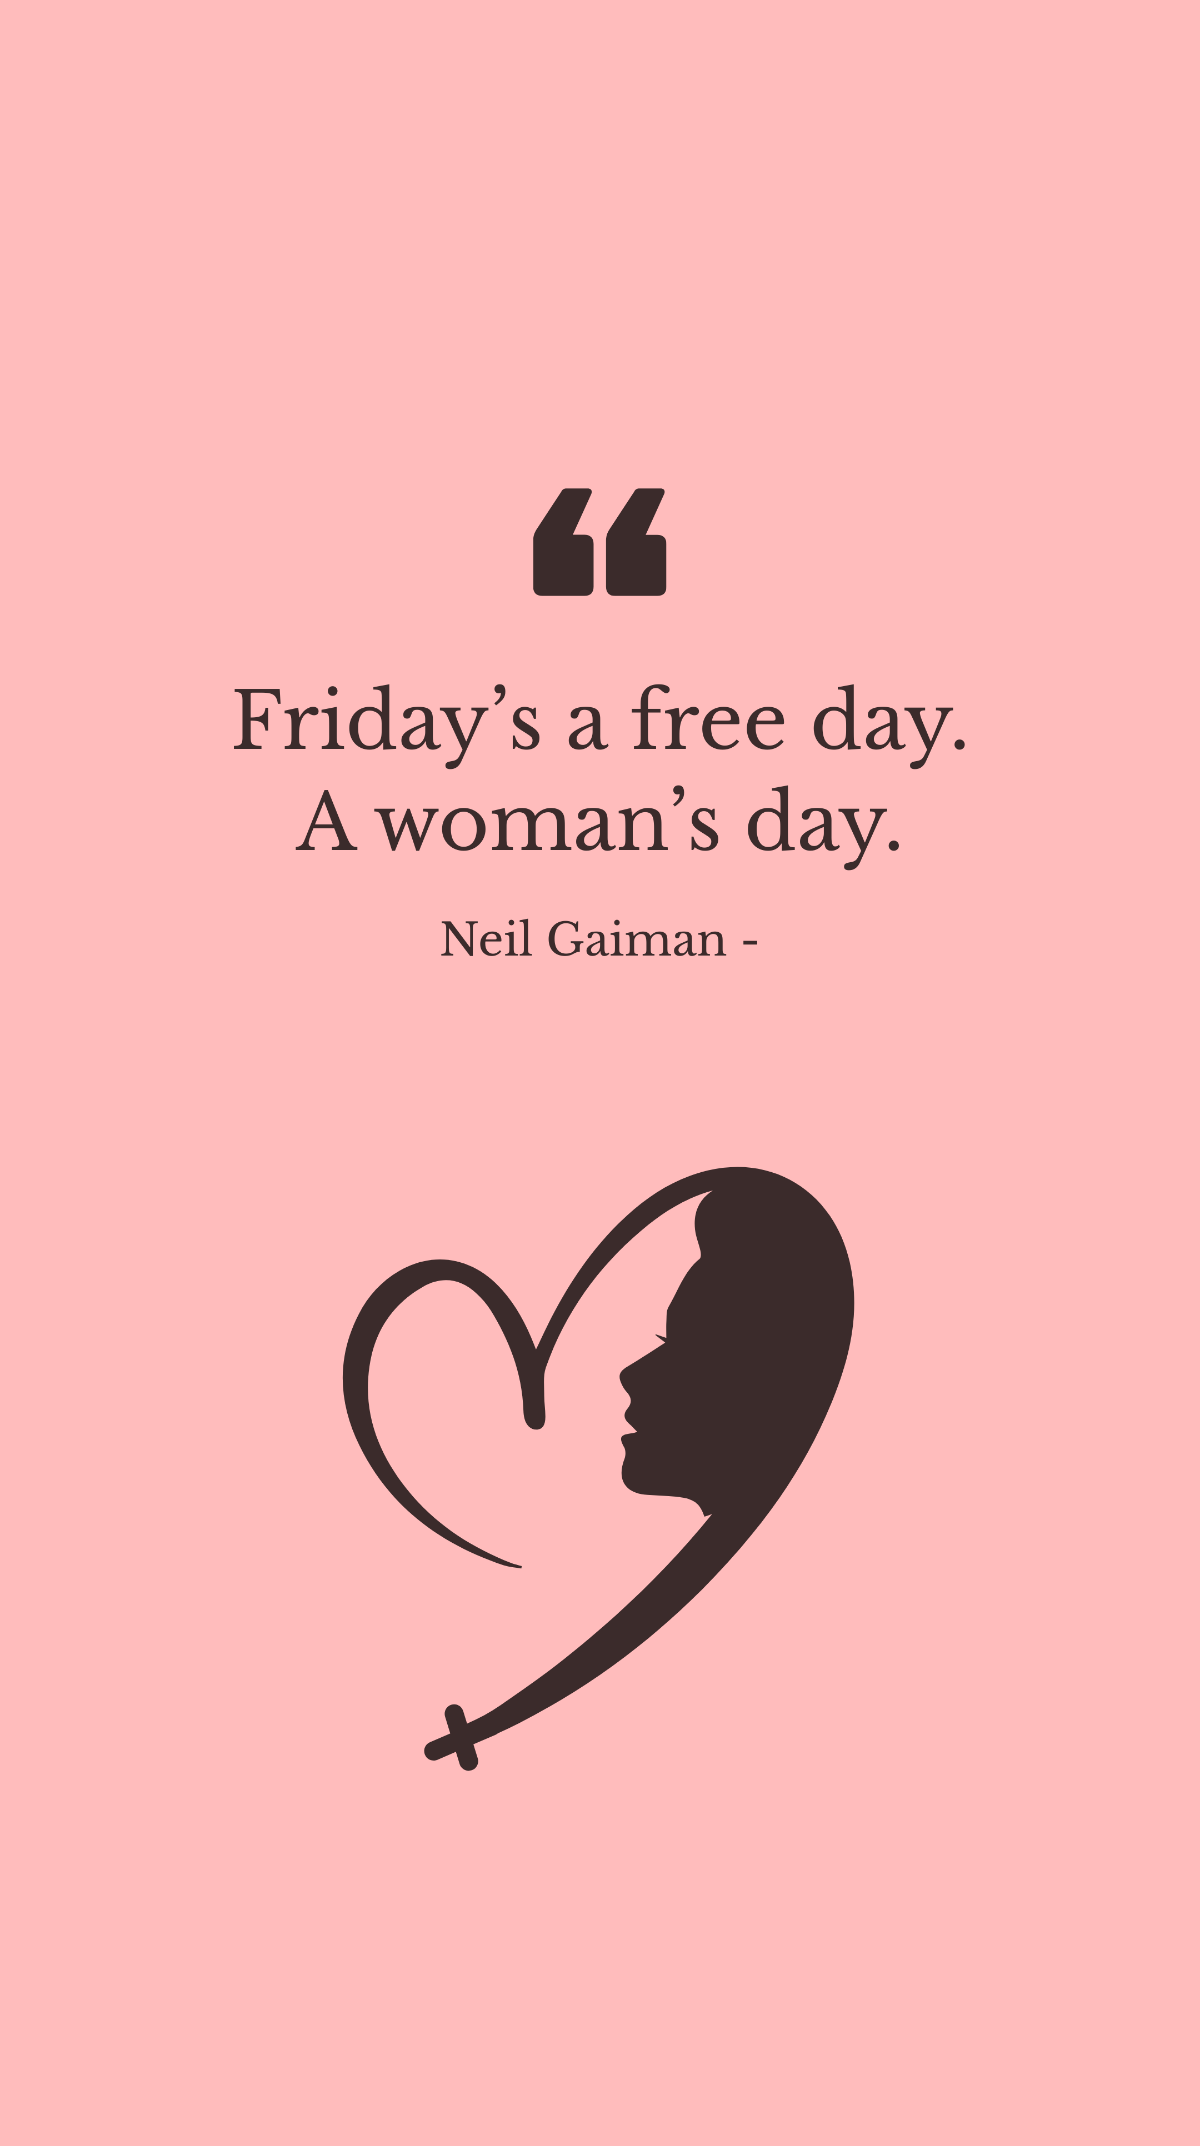 Neil Gaiman - Friday’s a day. A woman’s day. Template